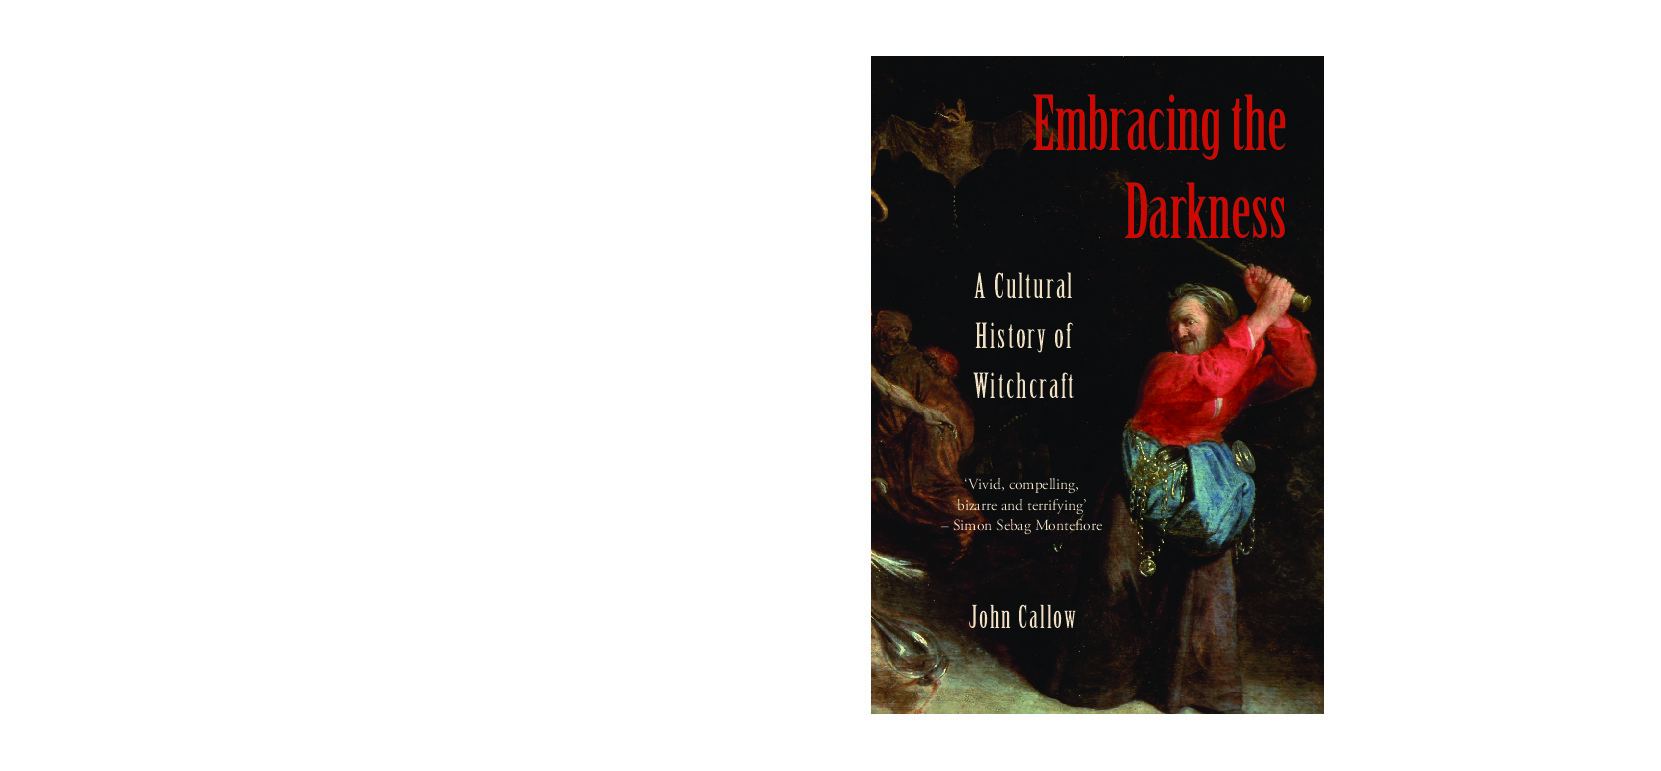 Embracing the Darkness A Cultural History of Witchcraft 9781350986213, 9781786732613 image